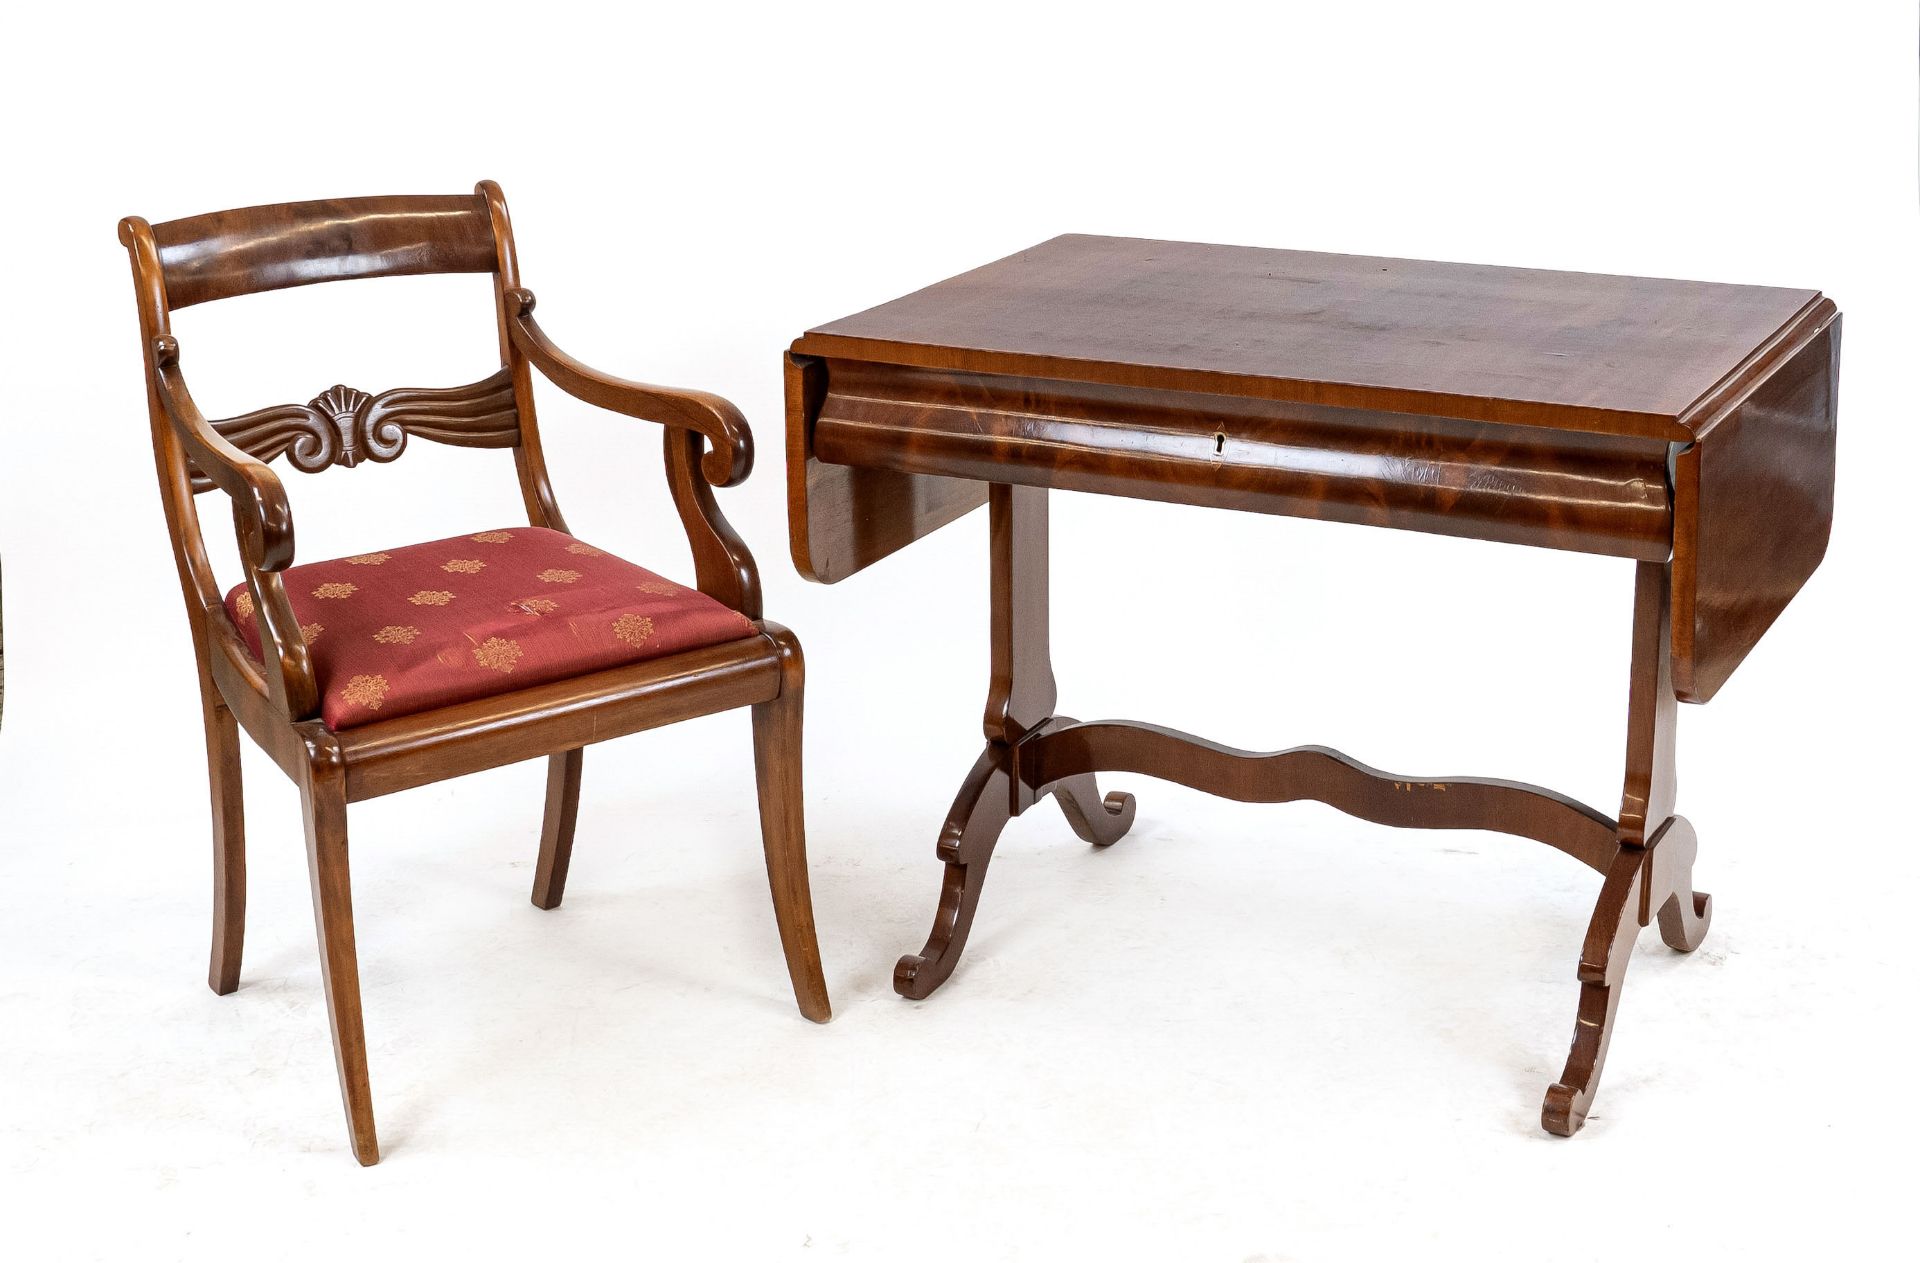 Biedermeier folding table around 1830 with matching chair (20th c.), solid mahogany and veneered, 76